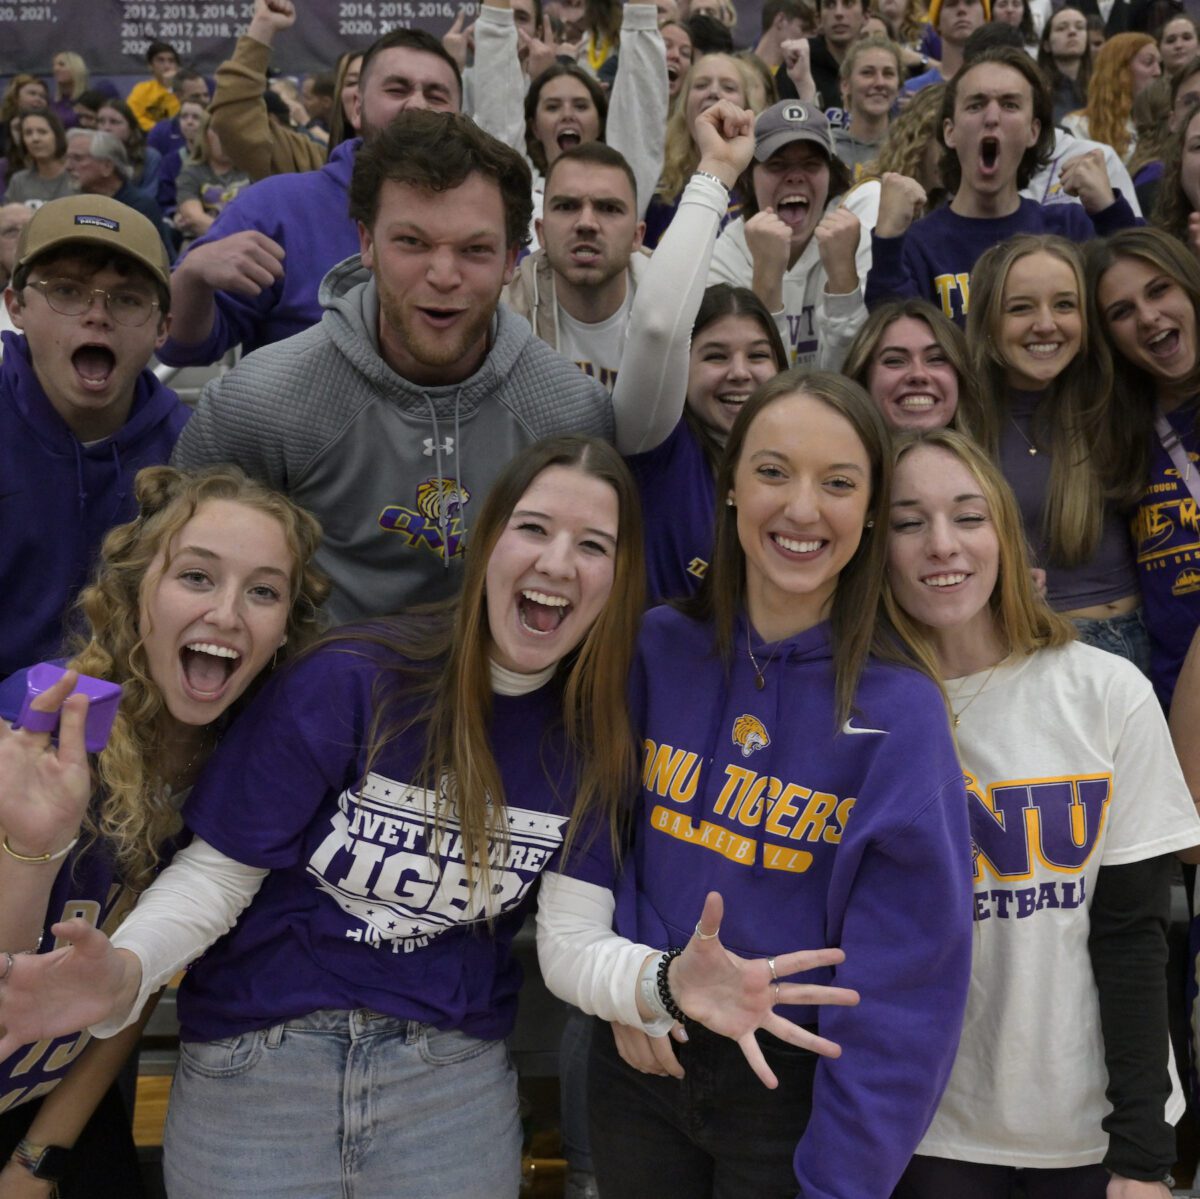 Excited students cheering at basketball game